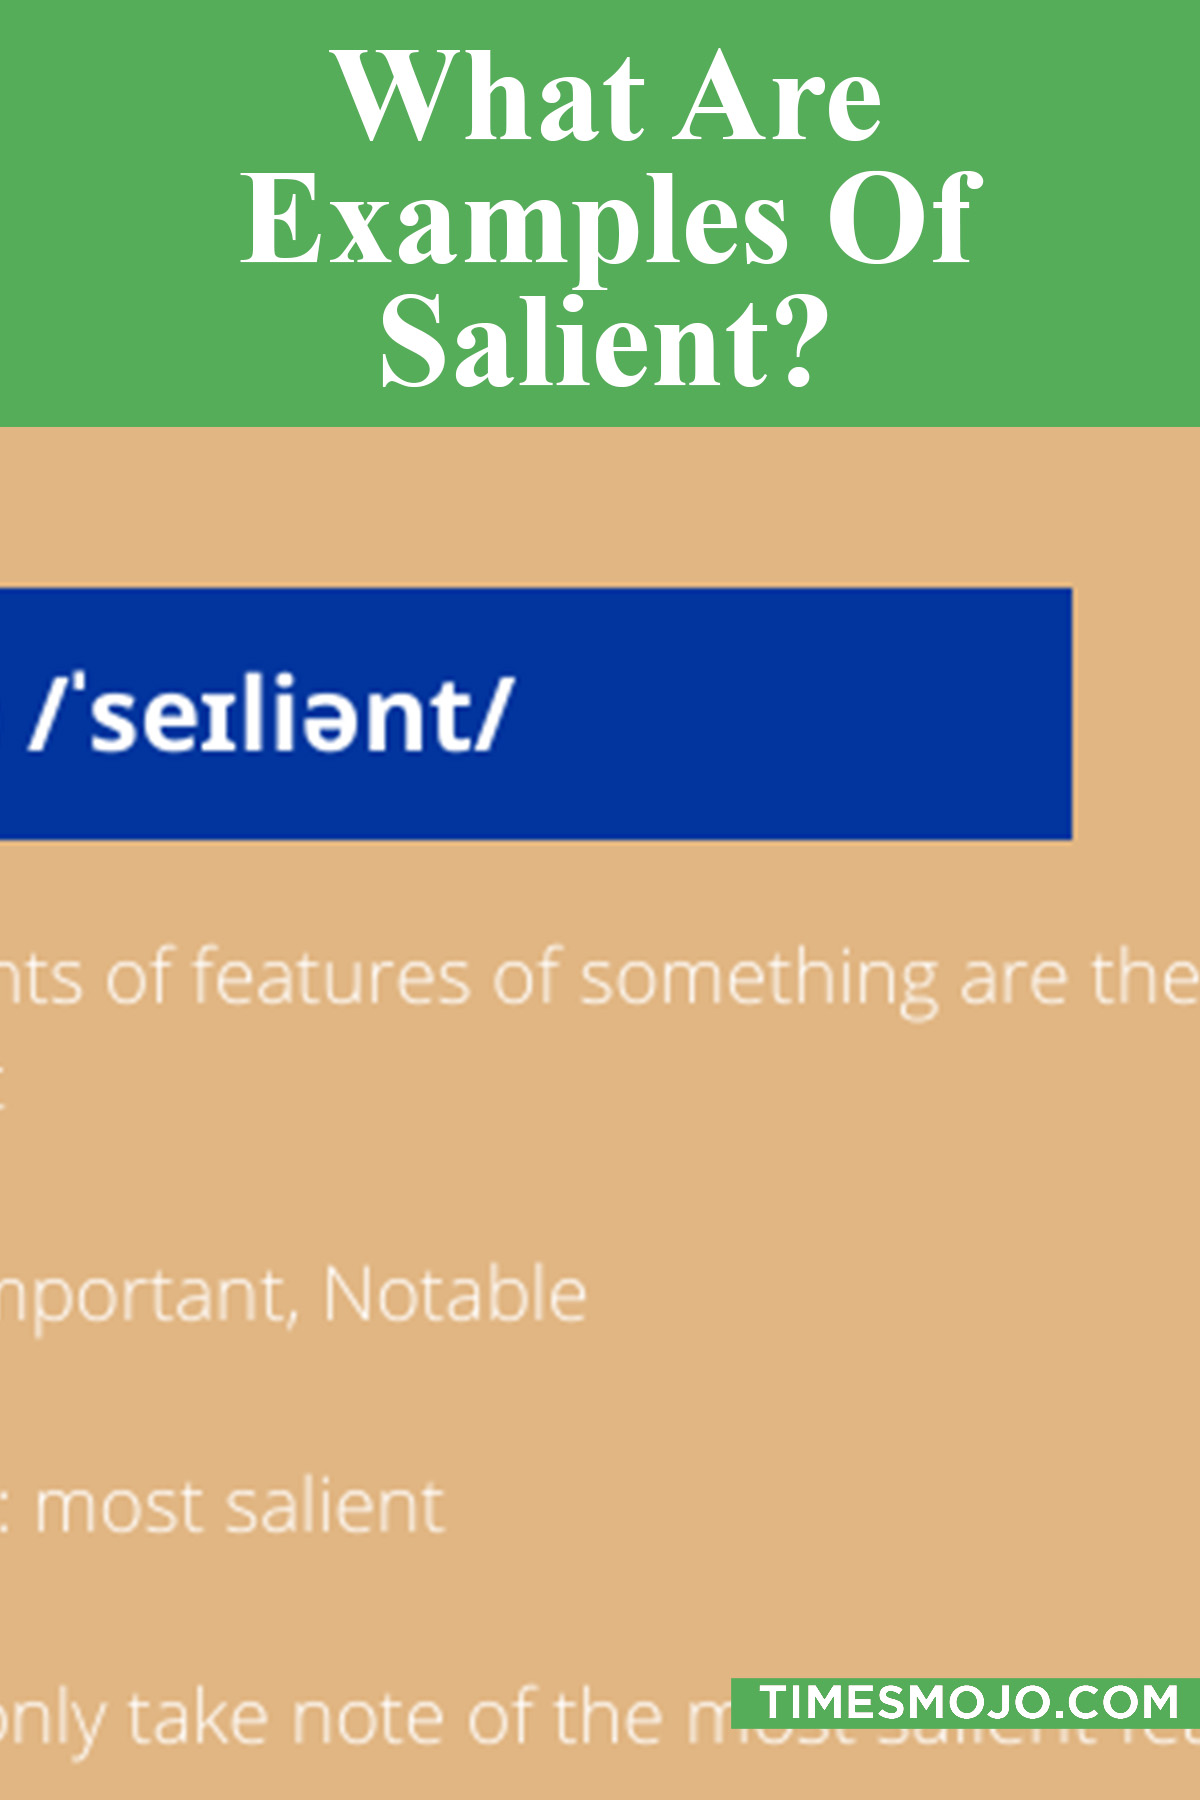 What Are Examples Of Salient